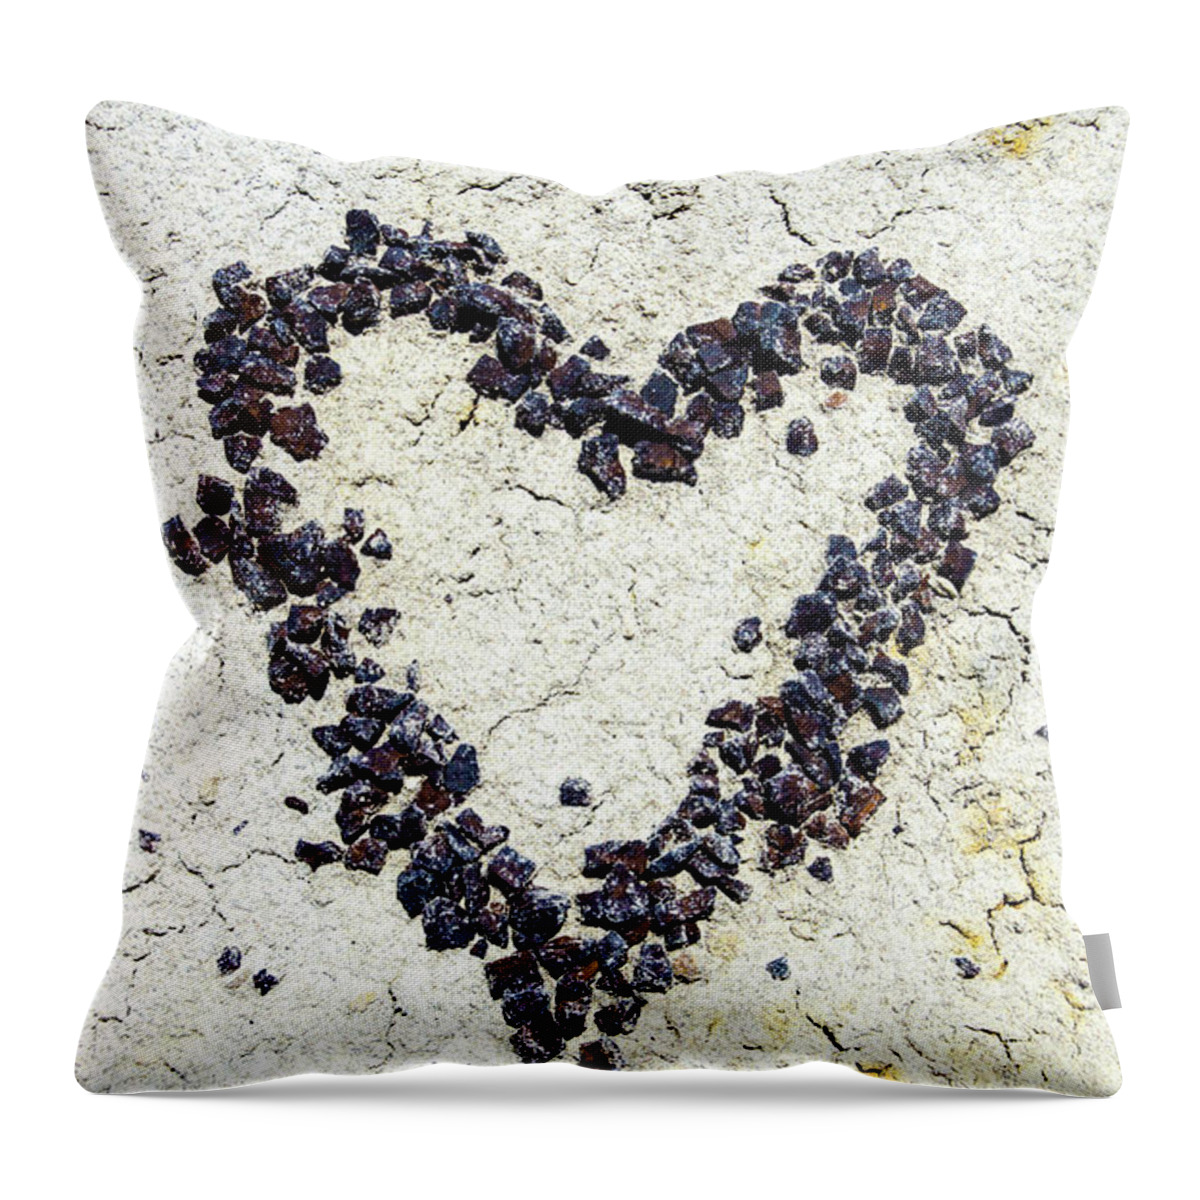 Bisti Wilderness Throw Pillow featuring the mixed media Love Is All You Need I by Nando Lardi